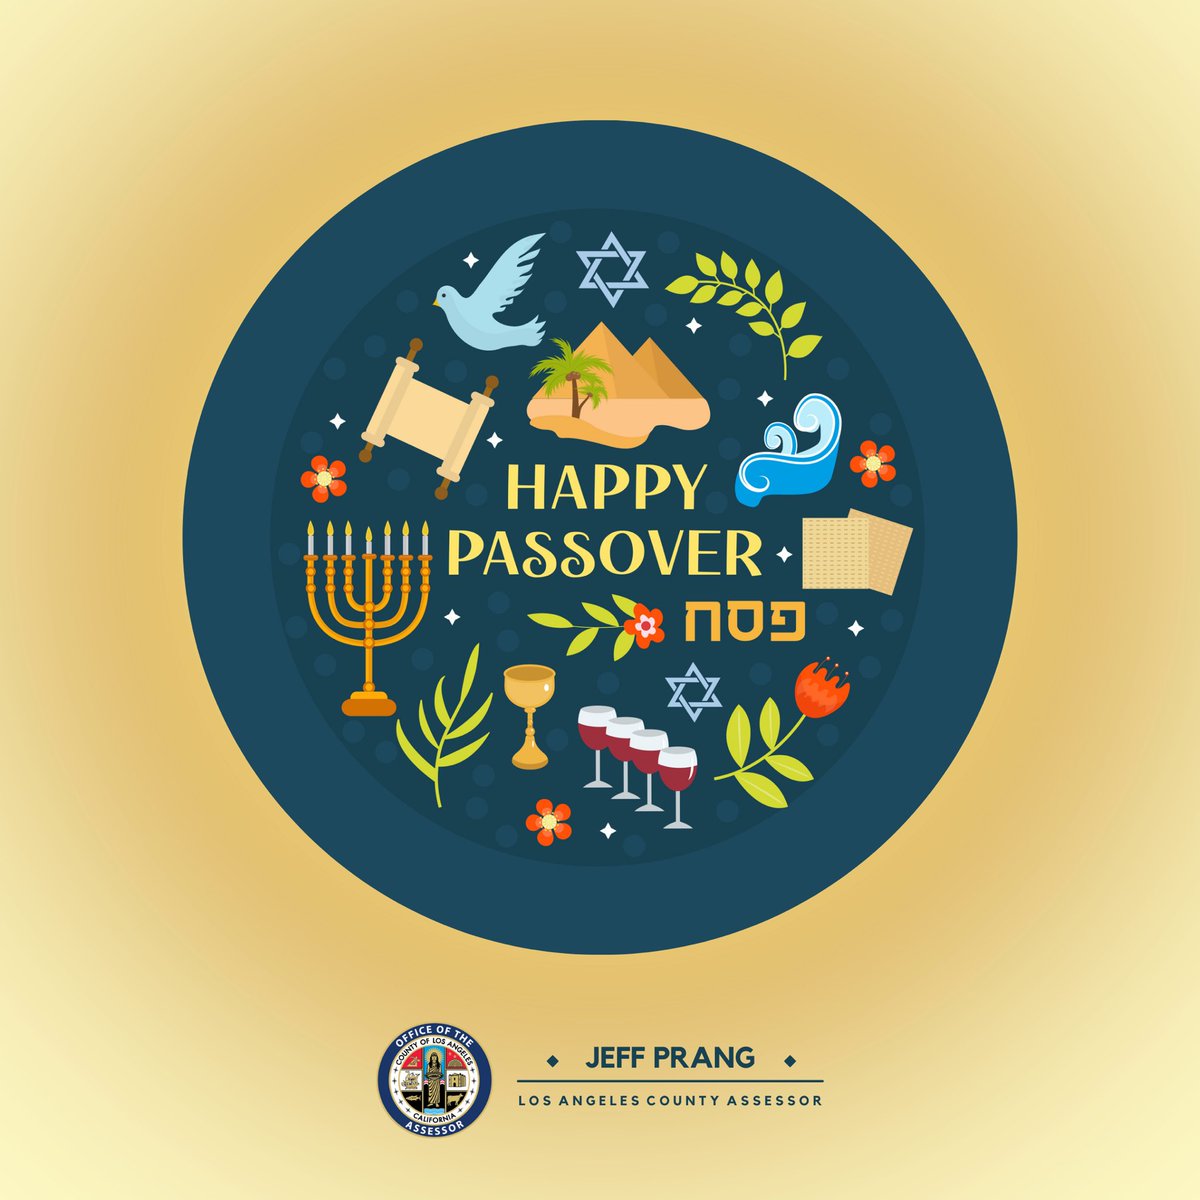 May this Passover bring renewal, reflection, and a deeper appreciation for the bonds that unite us. Chag Sameach!